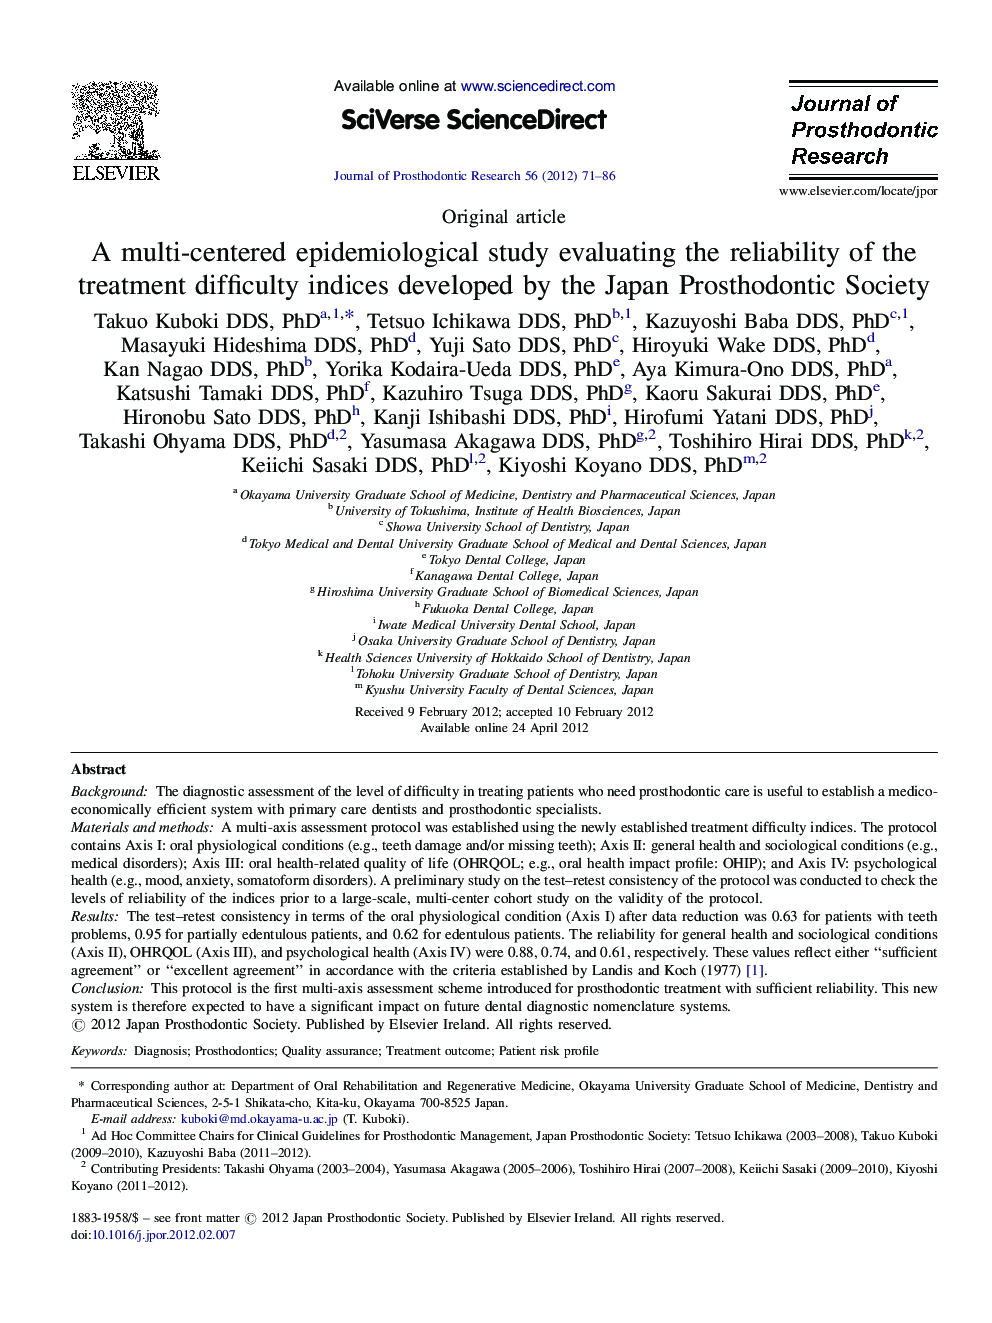 A multi-centered epidemiological study evaluating the reliability of the treatment difficulty indices developed by the Japan Prosthodontic Society